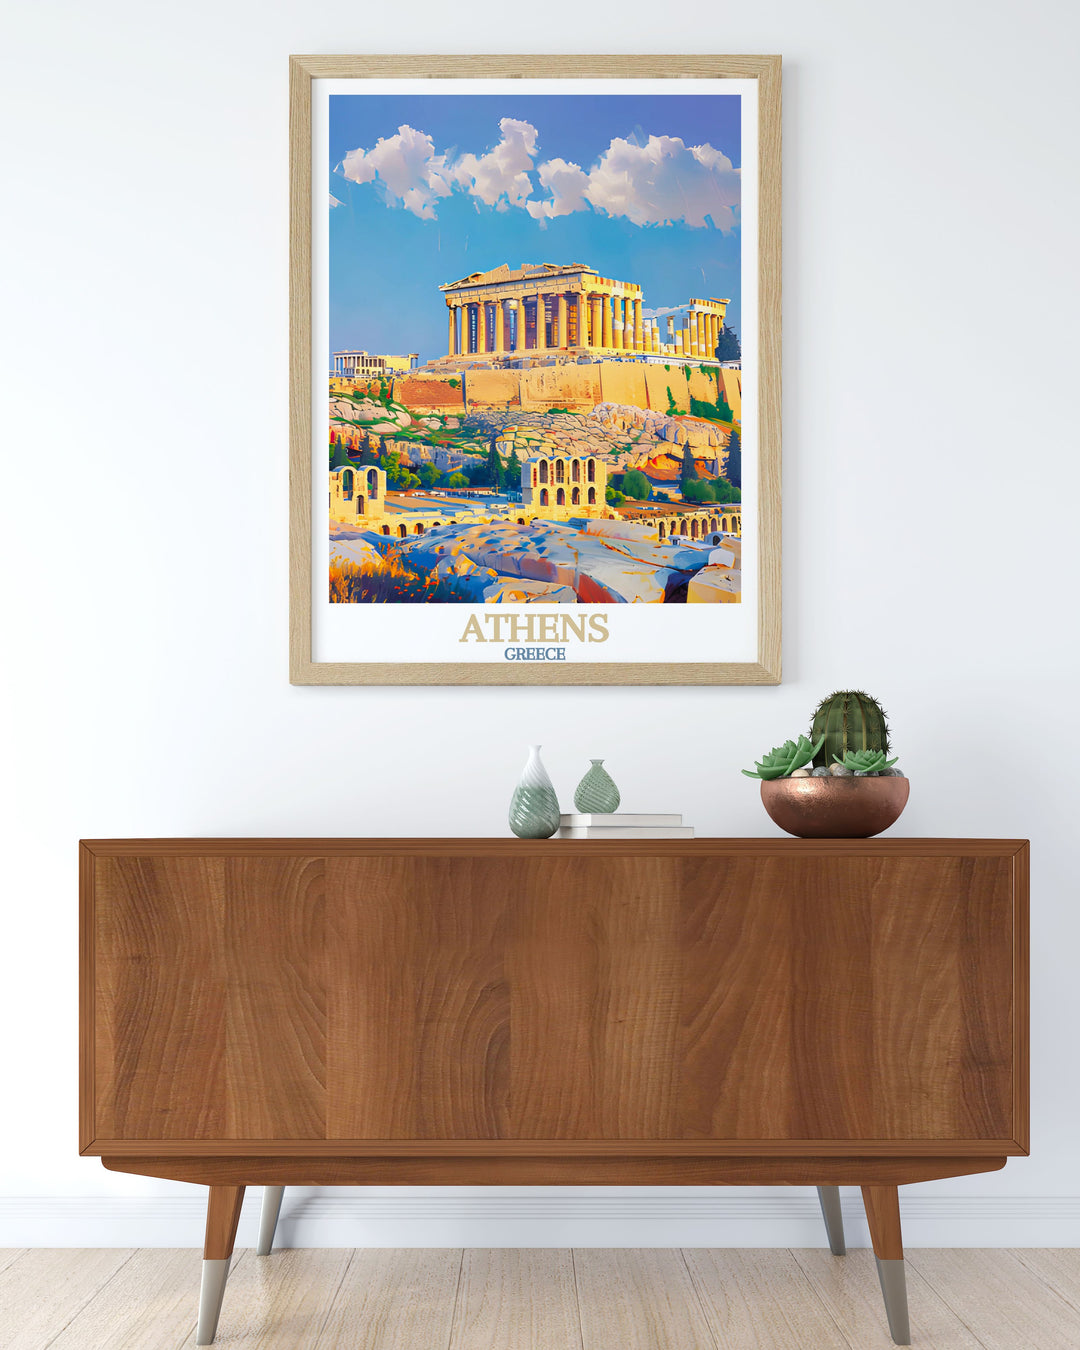 Fine line print of Athens Georgia with a focus on the citys street map and The Acropolis. This matted art piece is perfect for wall decor and as a meaningful gift for any occasion.